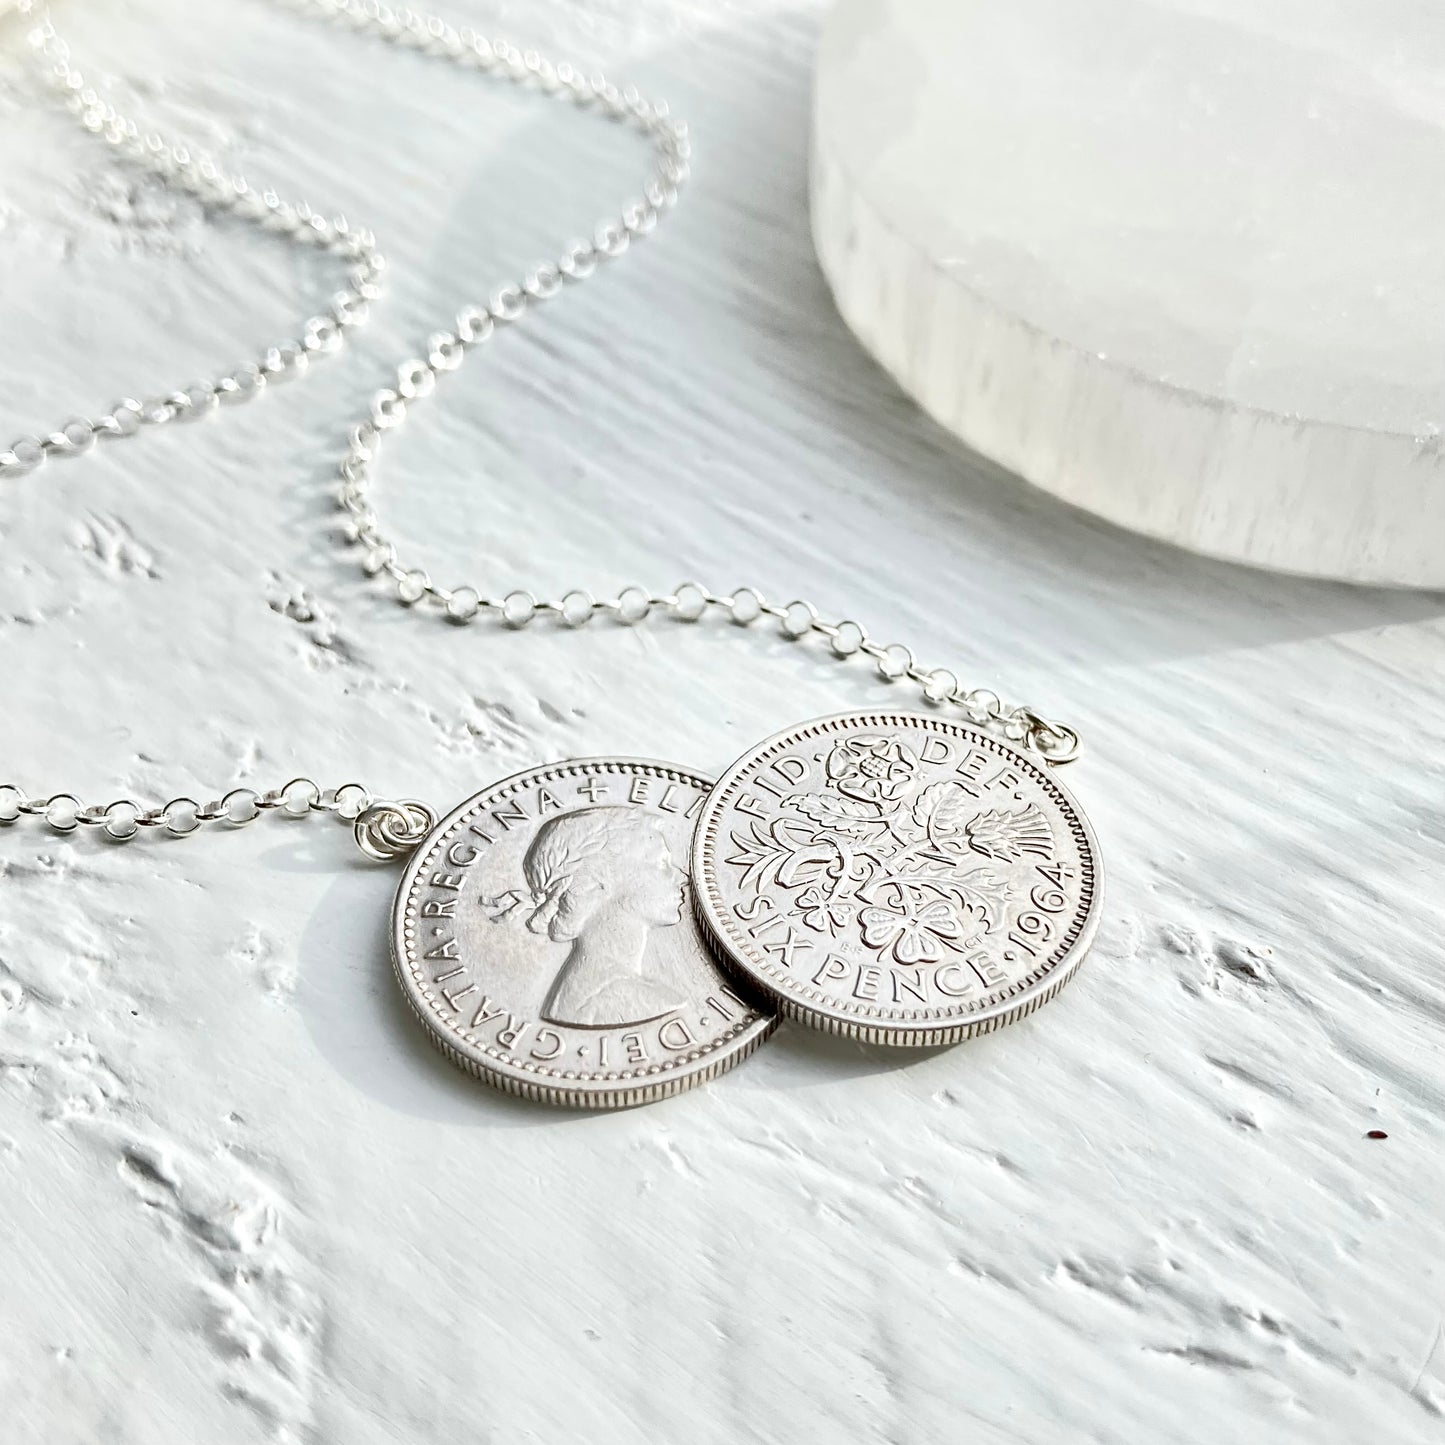 1964 Double Sixpence Necklace - 60th Birthday